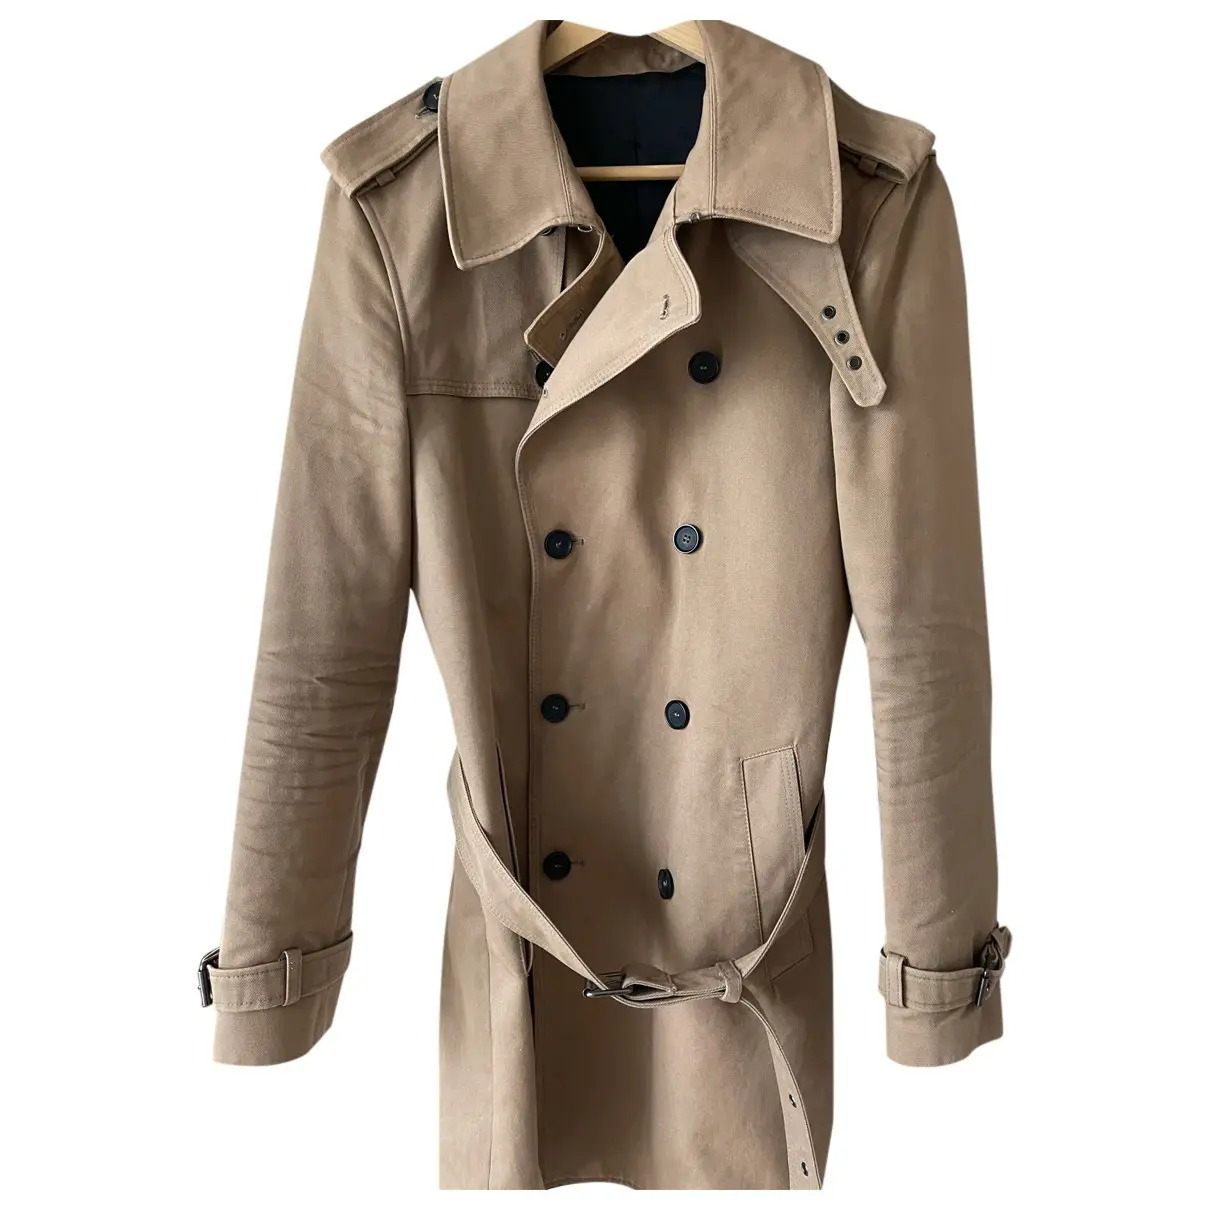 Fall Winter 2019 trench The Kooples